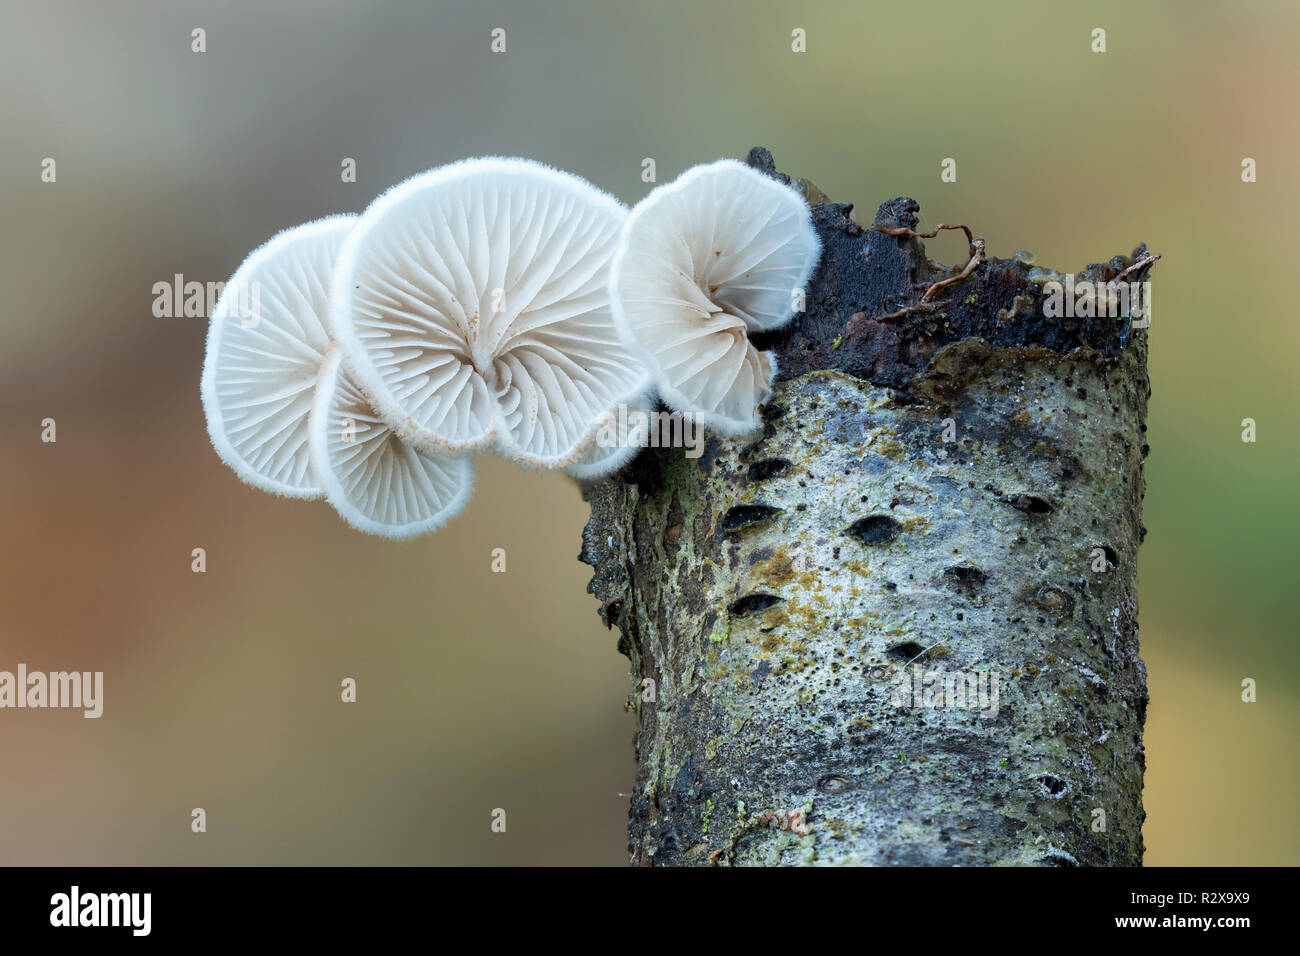 Fungi growing from end of rotten twig. Twig diameter approx 12mm. Tipperary, Ireland Stock Photo